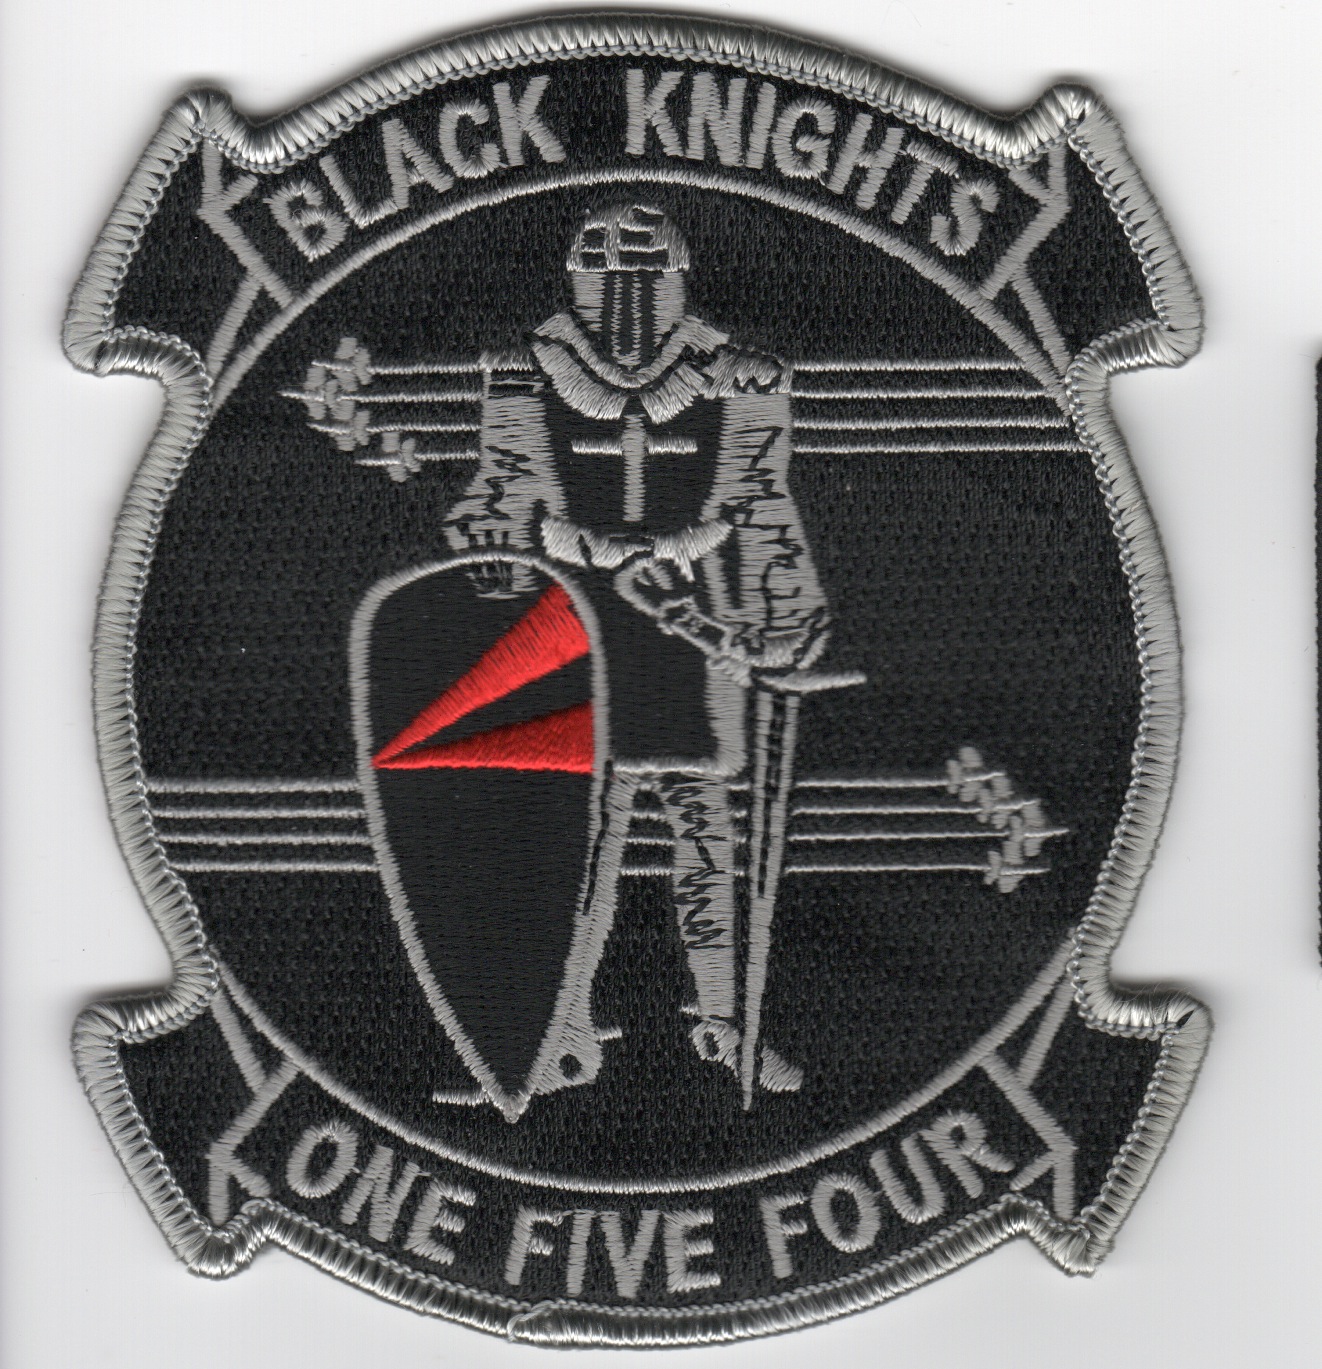 VF-154 'Historical' Squadron Patch (Gray on Gray)